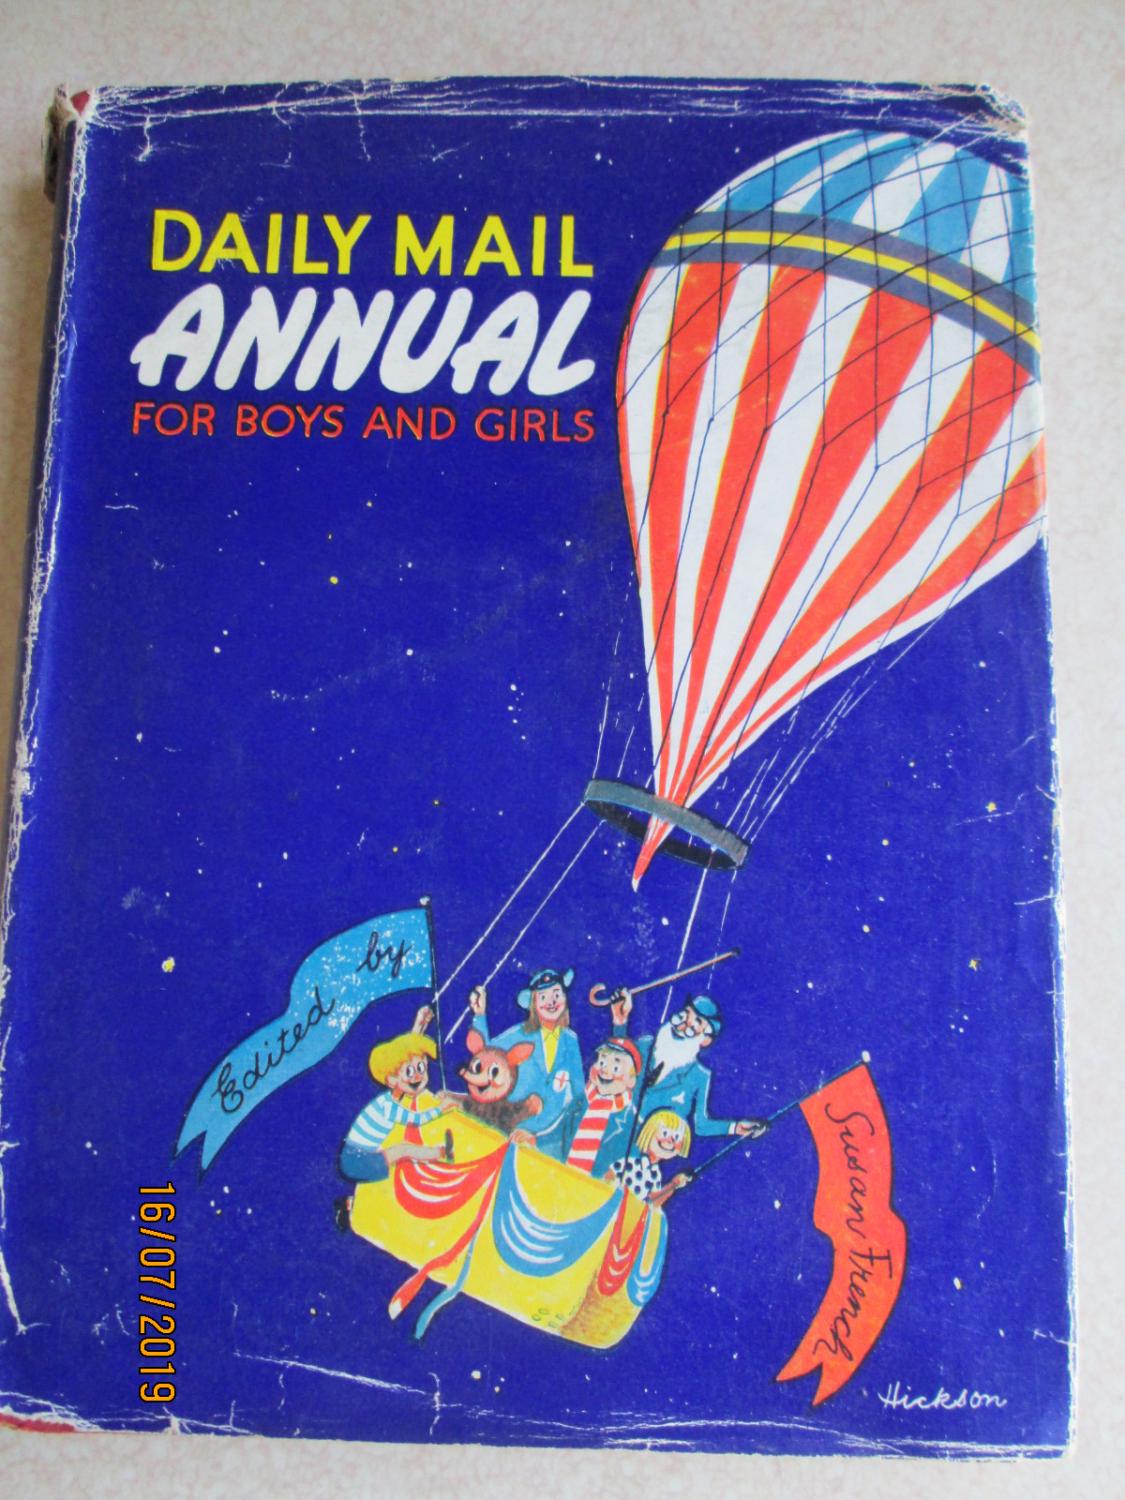 Daily Mail Annual for Boys and Girls (1954) Enid Blyton, Mollie Chappell, Andrew Roberts et al [Good]   HB DJ first edition. DJ not clipped. Red cloth boards. Black titles + hot air balloon illust front. Black titles spine. 24.2 x 18.2cm. 199 pages. 2 tone illustrated with music xmas carol front and back e/ps. b/w, f/c, 2 tone illusts throughout. As well as stories, articles on: Crown Jewels. Space Travel. Marine Life. Tropical Birds etc. Condition: DJ creases, wear on edges and spine fair condition. Boards apart from slight rub bottom of spine good colour and condition. Internally pages beginning to yellow on edges. P154 & 155 crosswords partially completed in pencil with some rubbing out. Otherwise clean, little wear, binding firm. GC.